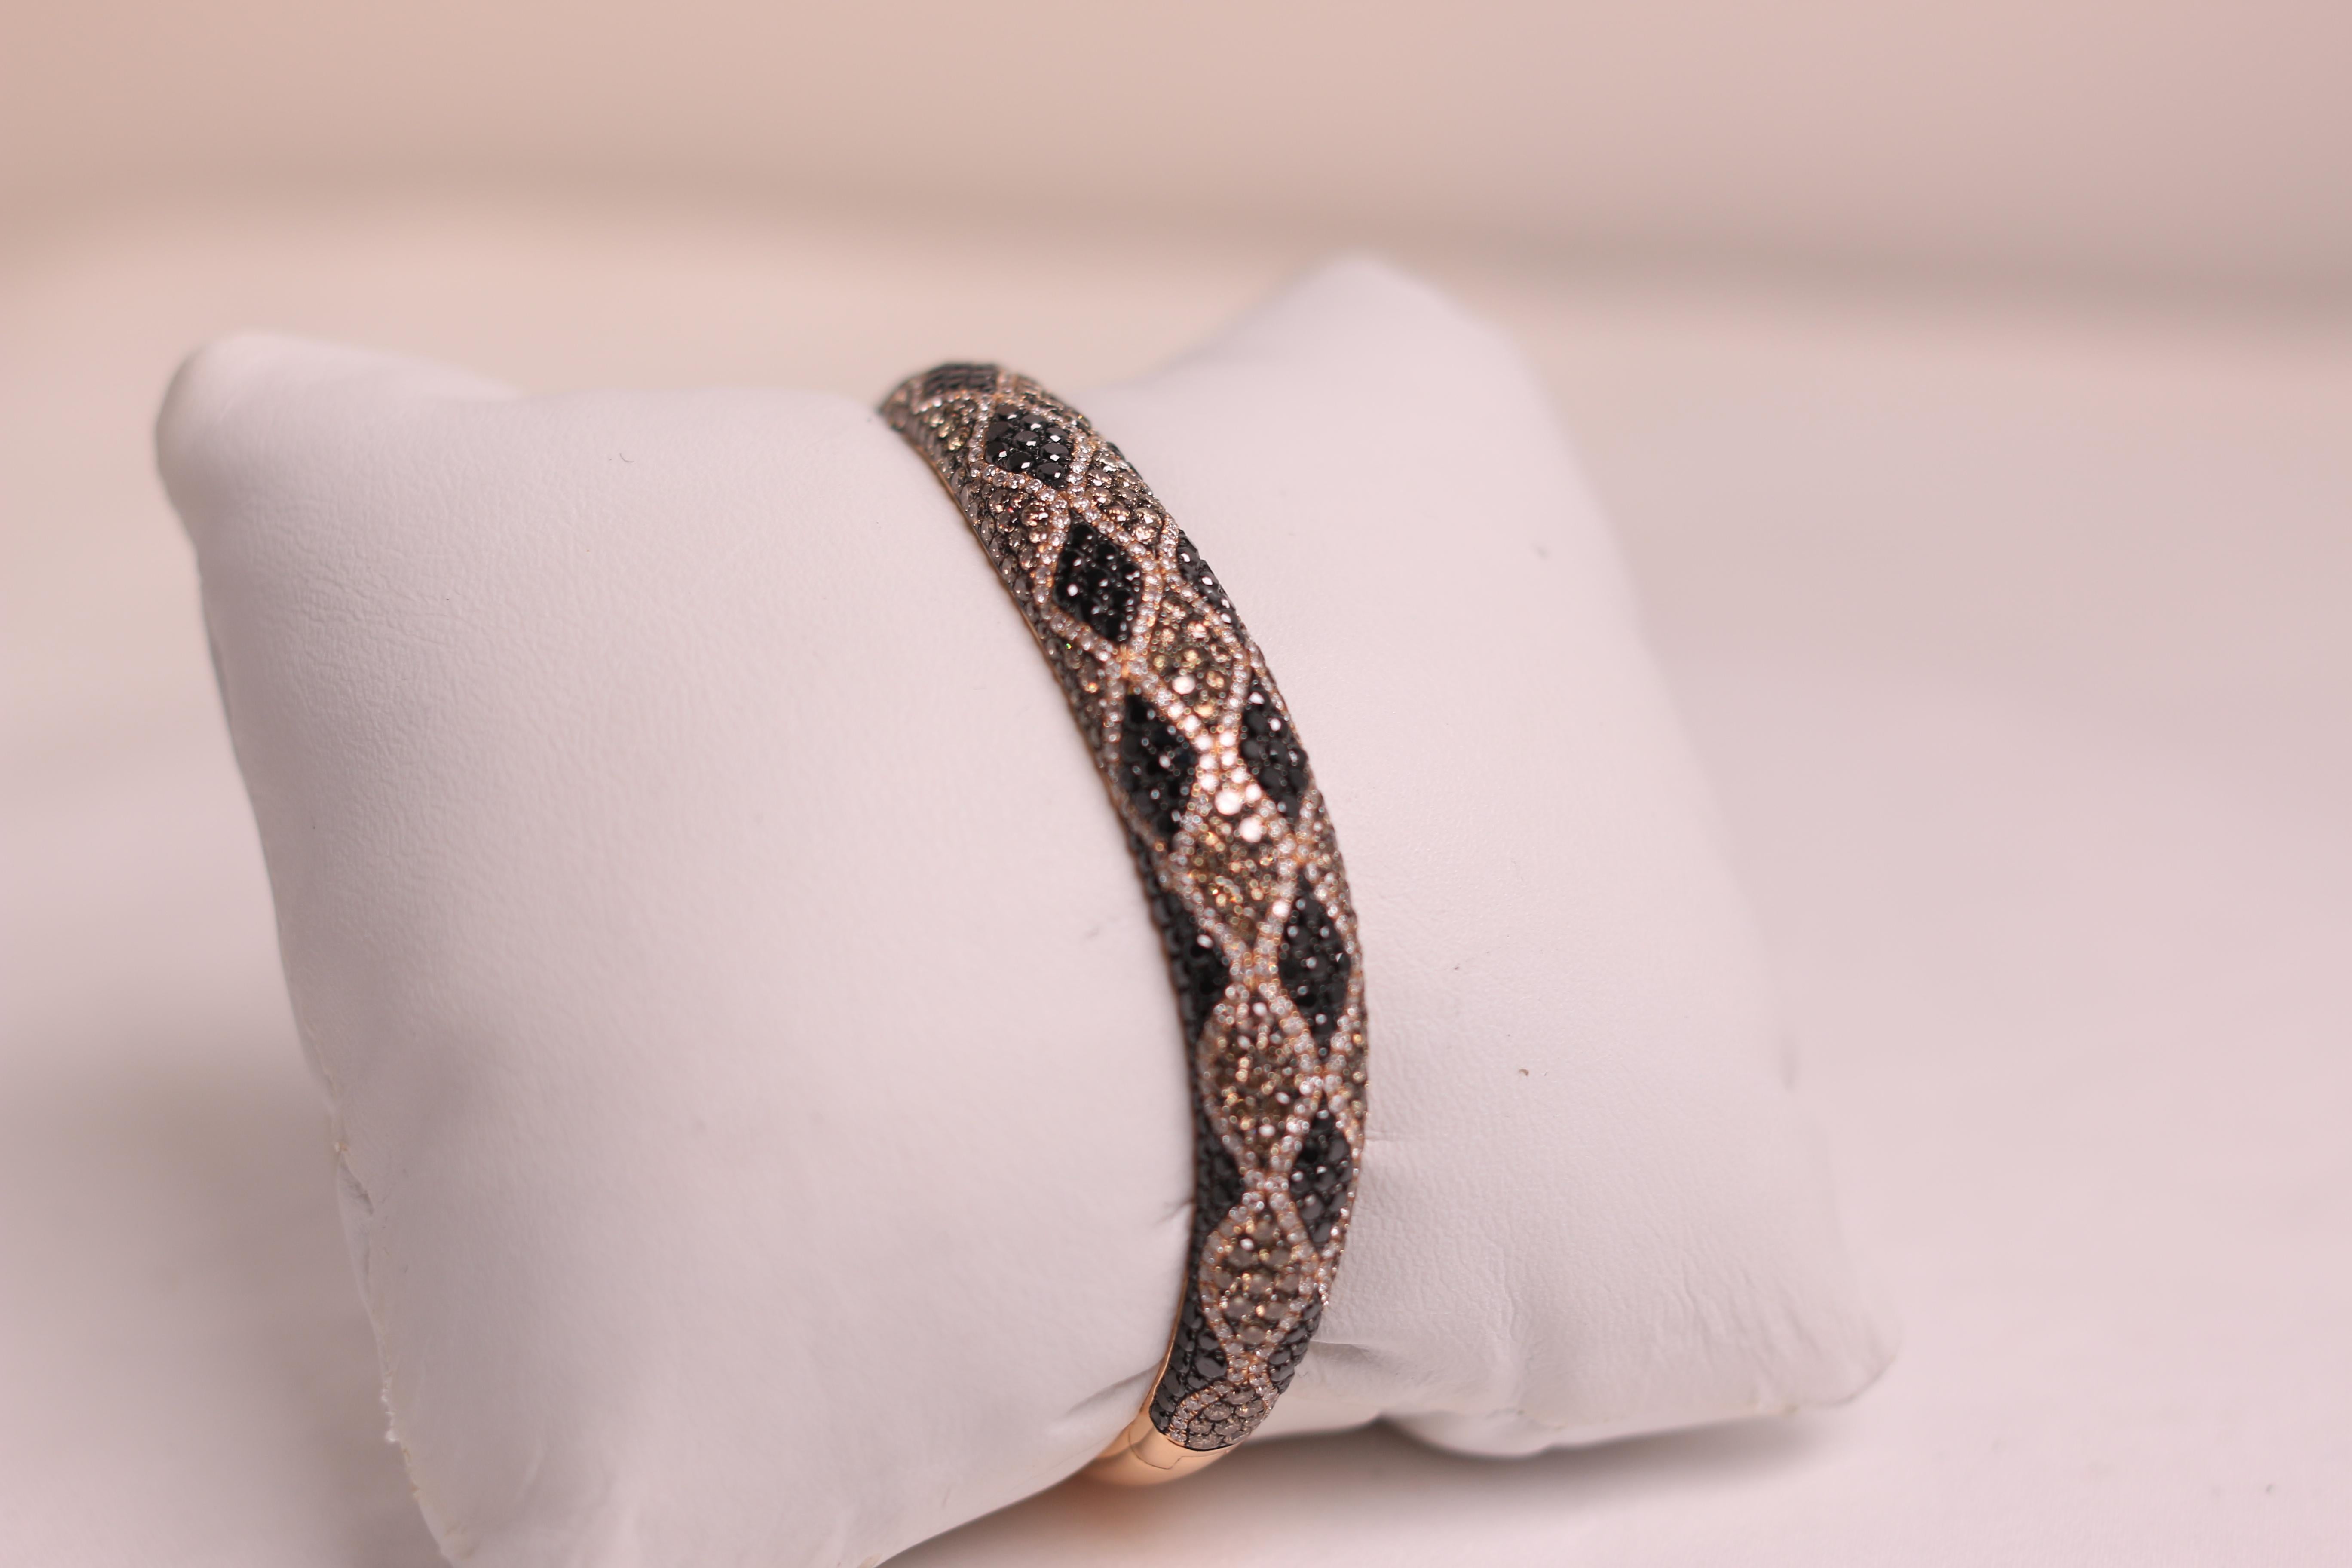 Fashion bangle with multi-color diamonds set in 18k rose gold. Bangle carries 2.11ct in round black diamonds, 2.25 in round champagne diamonds, and 0.98ct in round white diamonds. Giving this bangle a grand total of 5.34ct of diamonds. Stamped 18k J